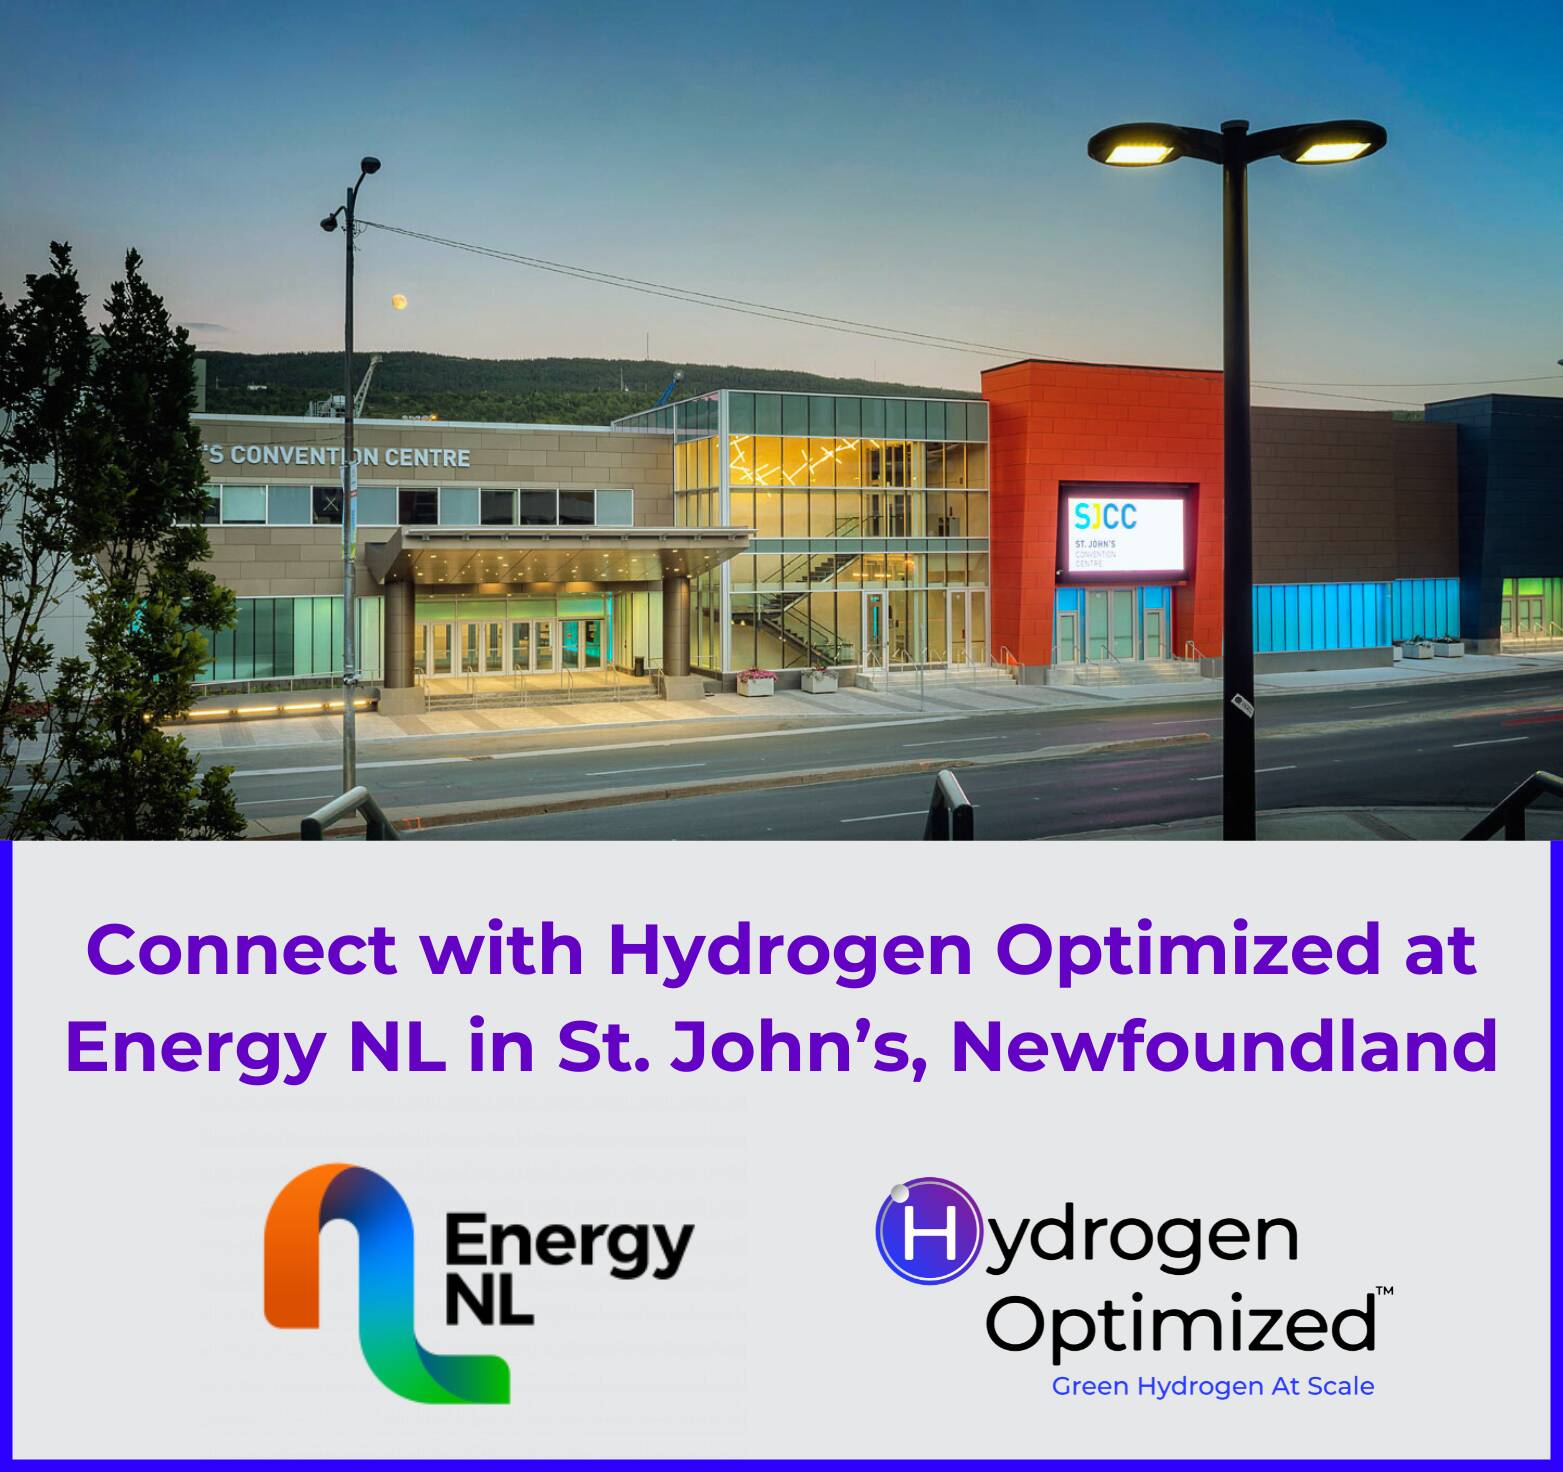 St. John's Convention Centre above the words "Connect with Hydrogen Optimized at Energy NL in St. John's Newfoundland" followed by the Energy NL and Hydrogen Optimized logos.